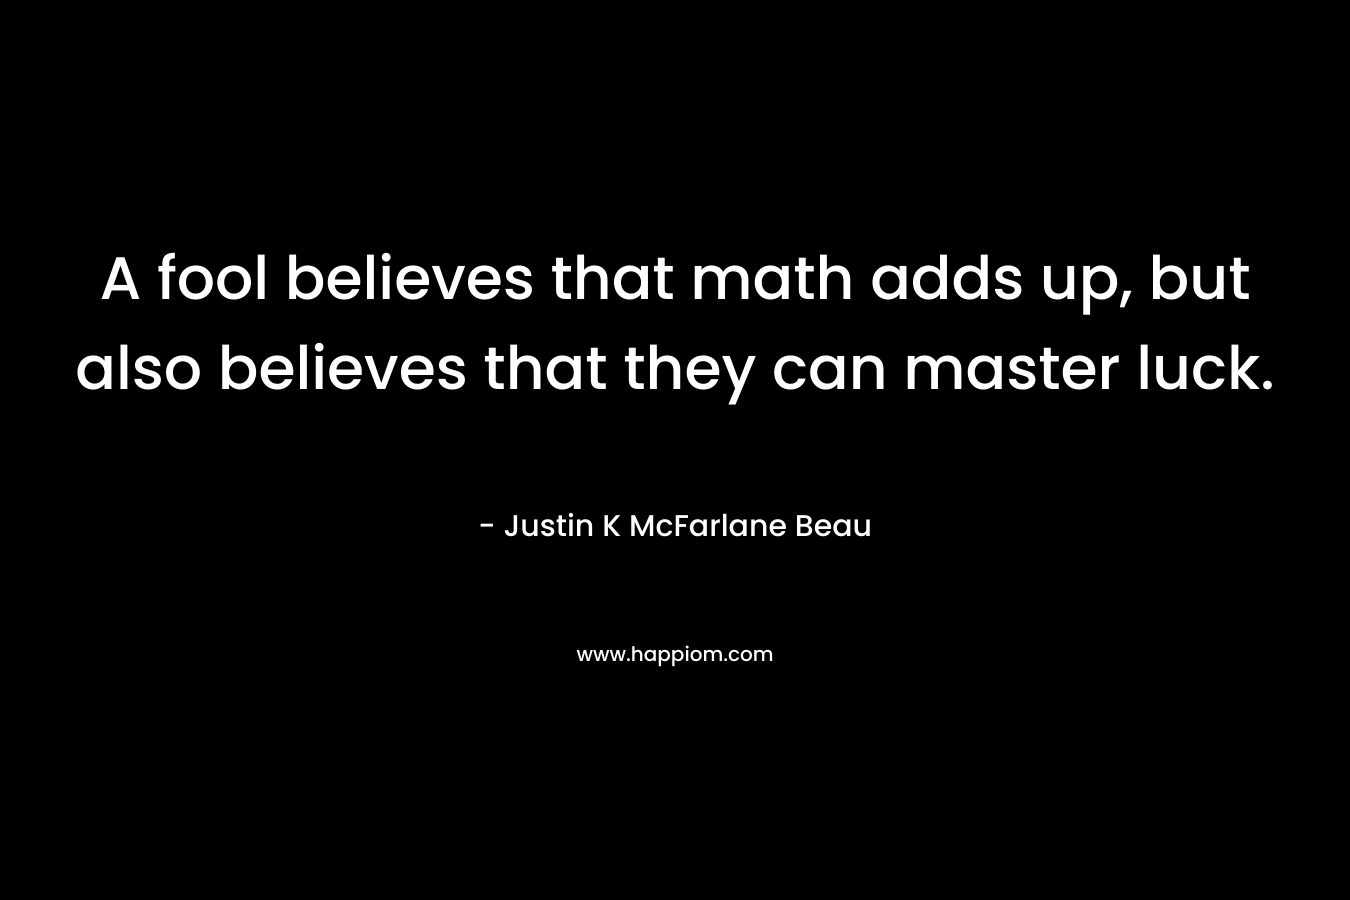 A fool believes that math adds up, but also believes that they can master luck.